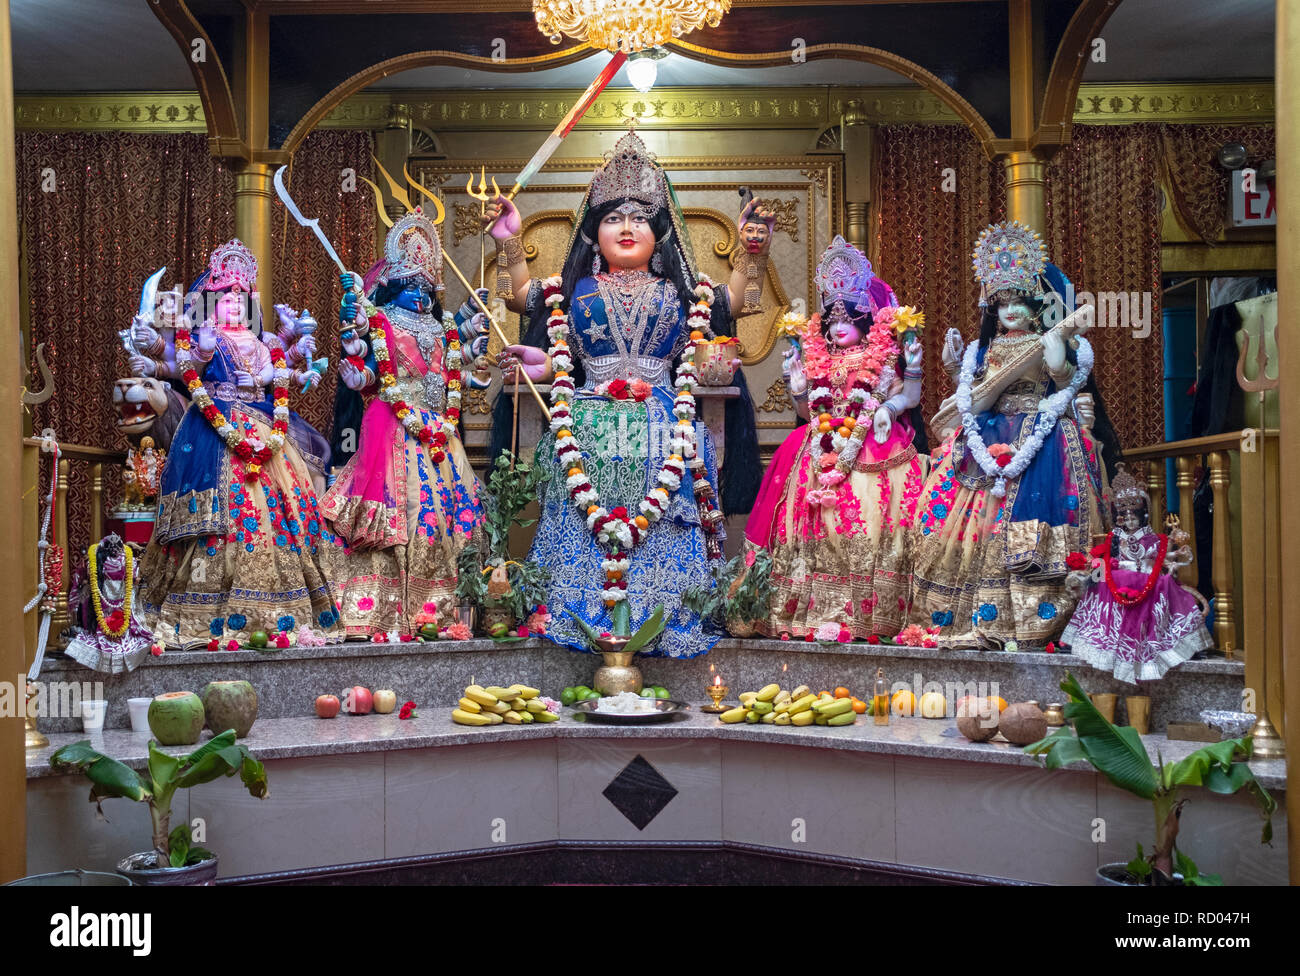 The altar at the Shri Shakti Mariammaa Hindu temple in Queens with several statues of deities. Stock Photo